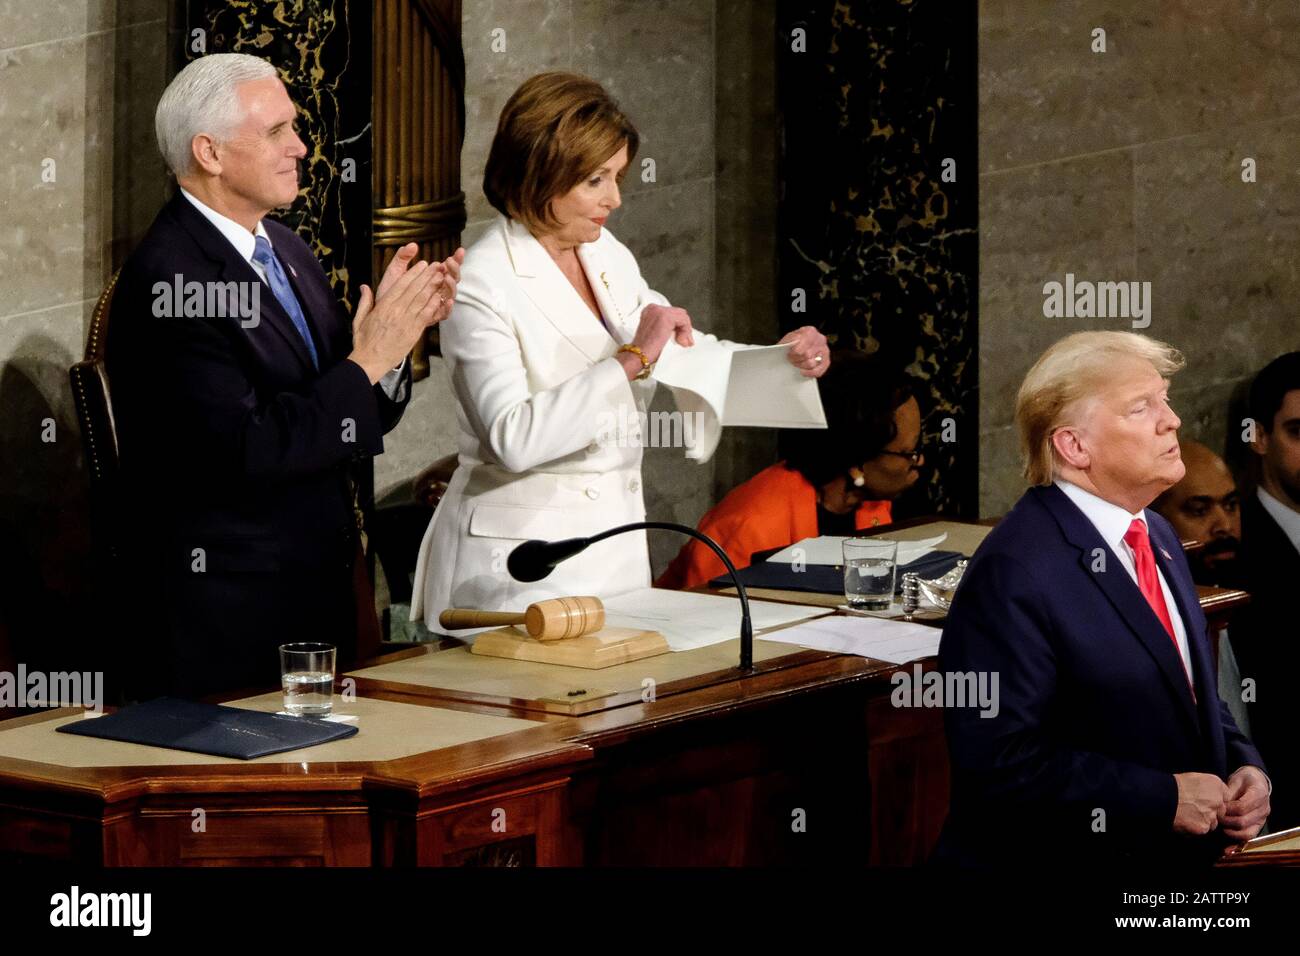 Washington, United States Of America. 04th Feb, 2020. Speaker of the House Nancy Pelosi holds up a copy of President Donald Trump's speech after tearing it up after he spoke at the 2020 State of the Union Address on Capitol Hill on February 4, 2020. Credit: Alex Wroblewski/CNP Photo via Credit: Newscom/Alamy Live News Stock Photo